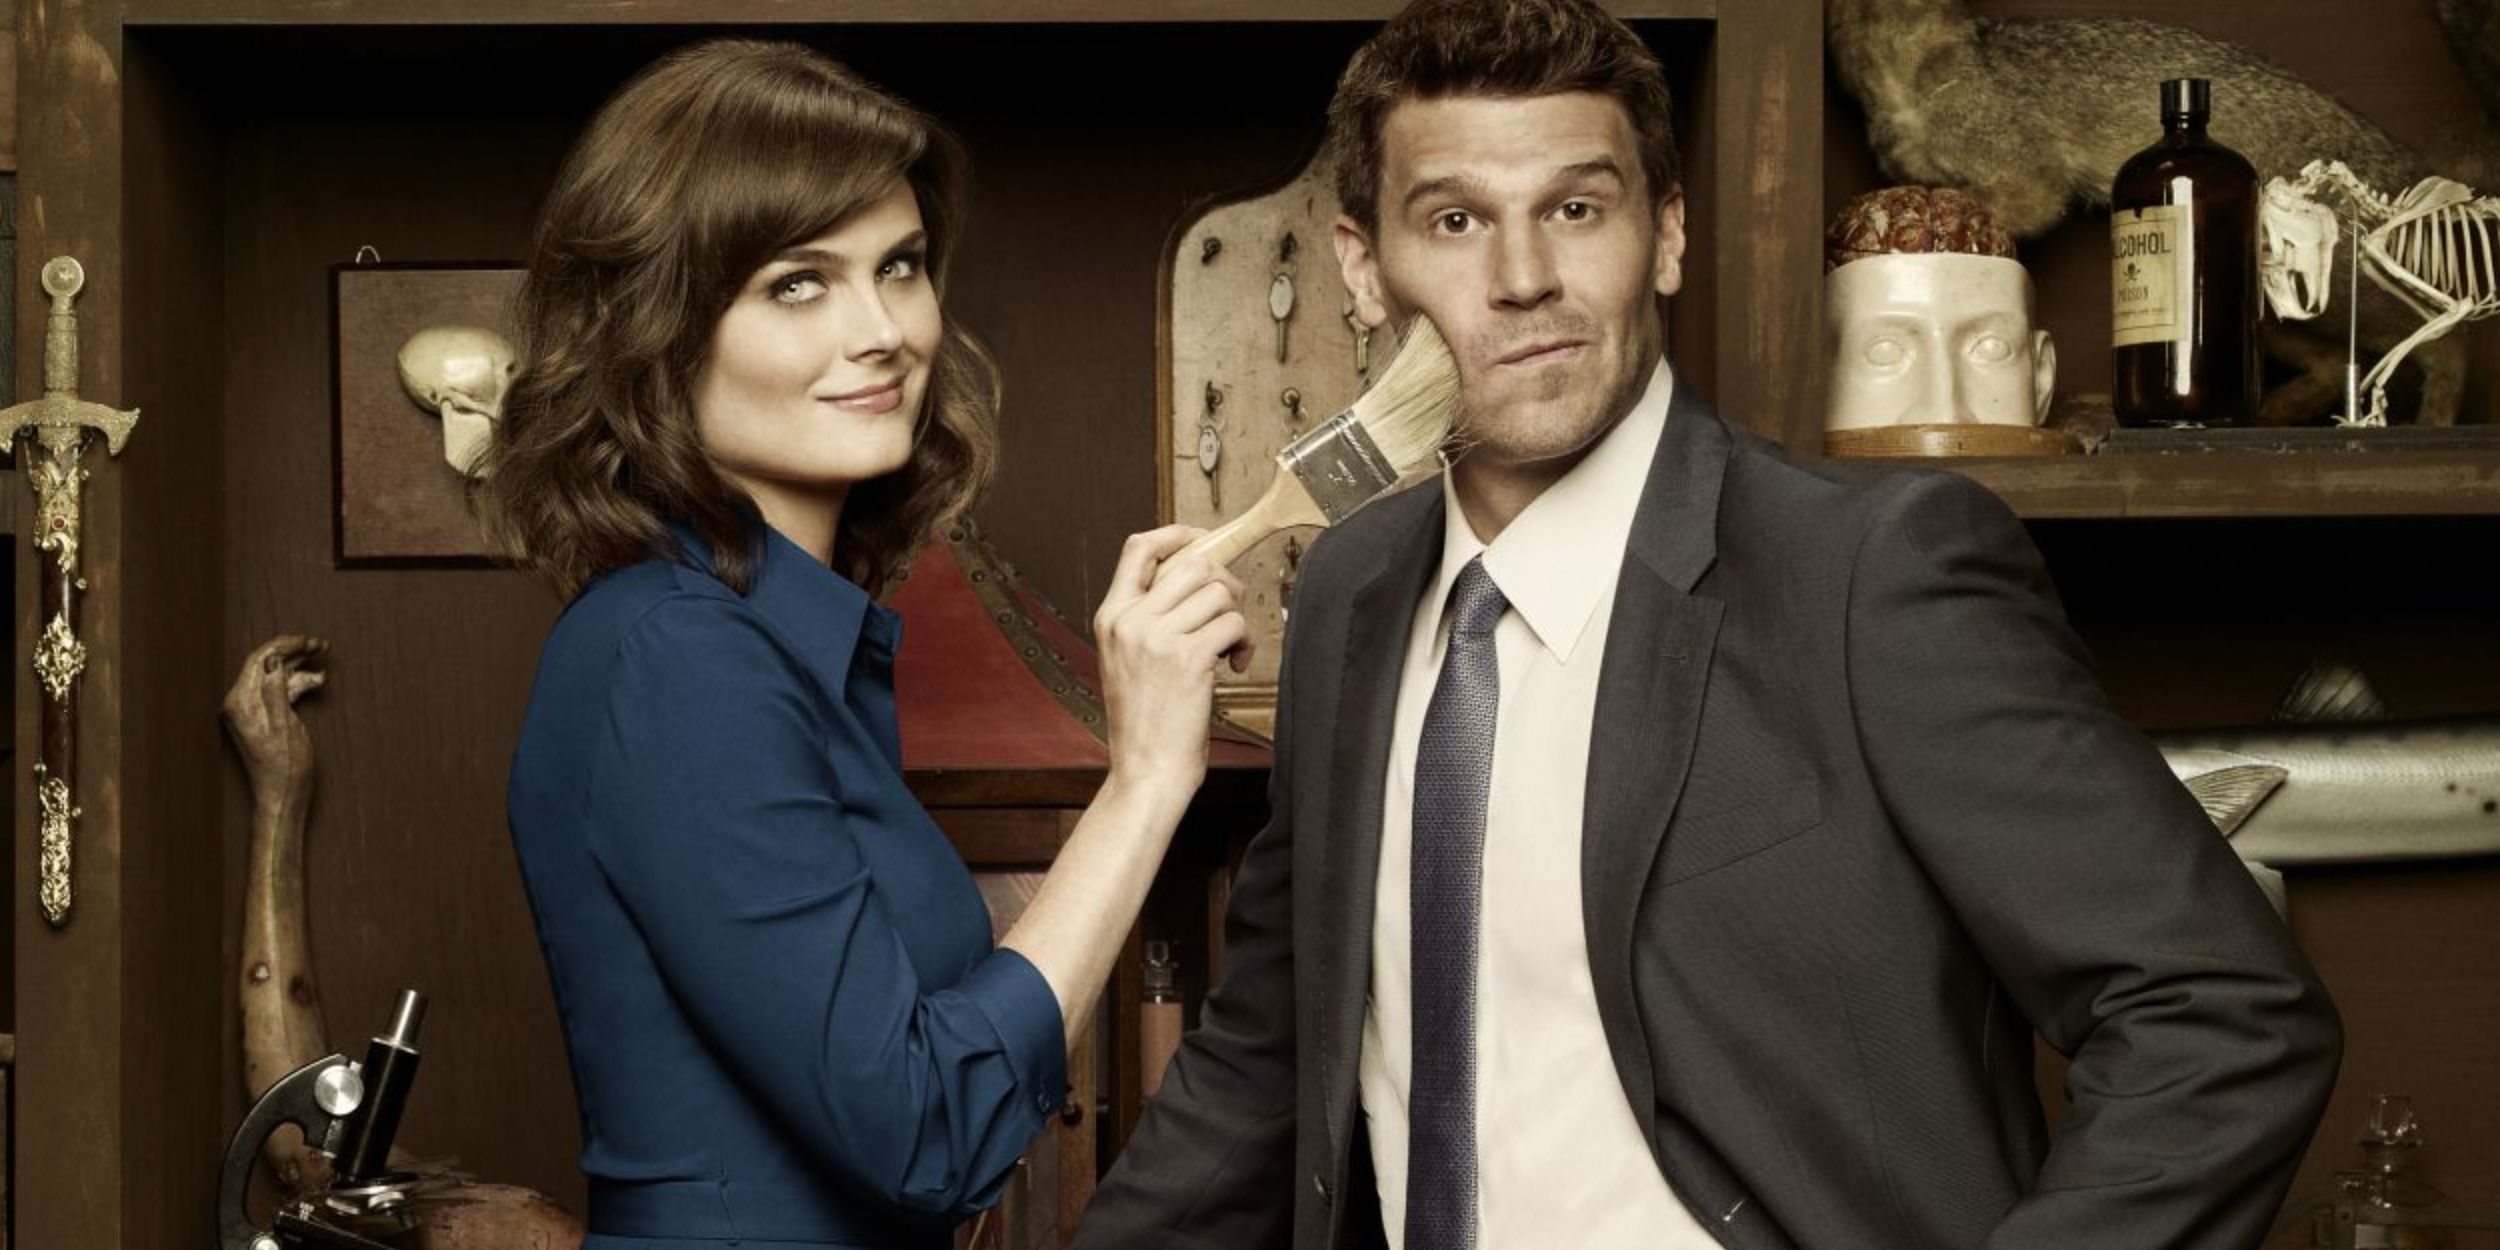 Brennan brushing Booths face in a promotional image for Bones